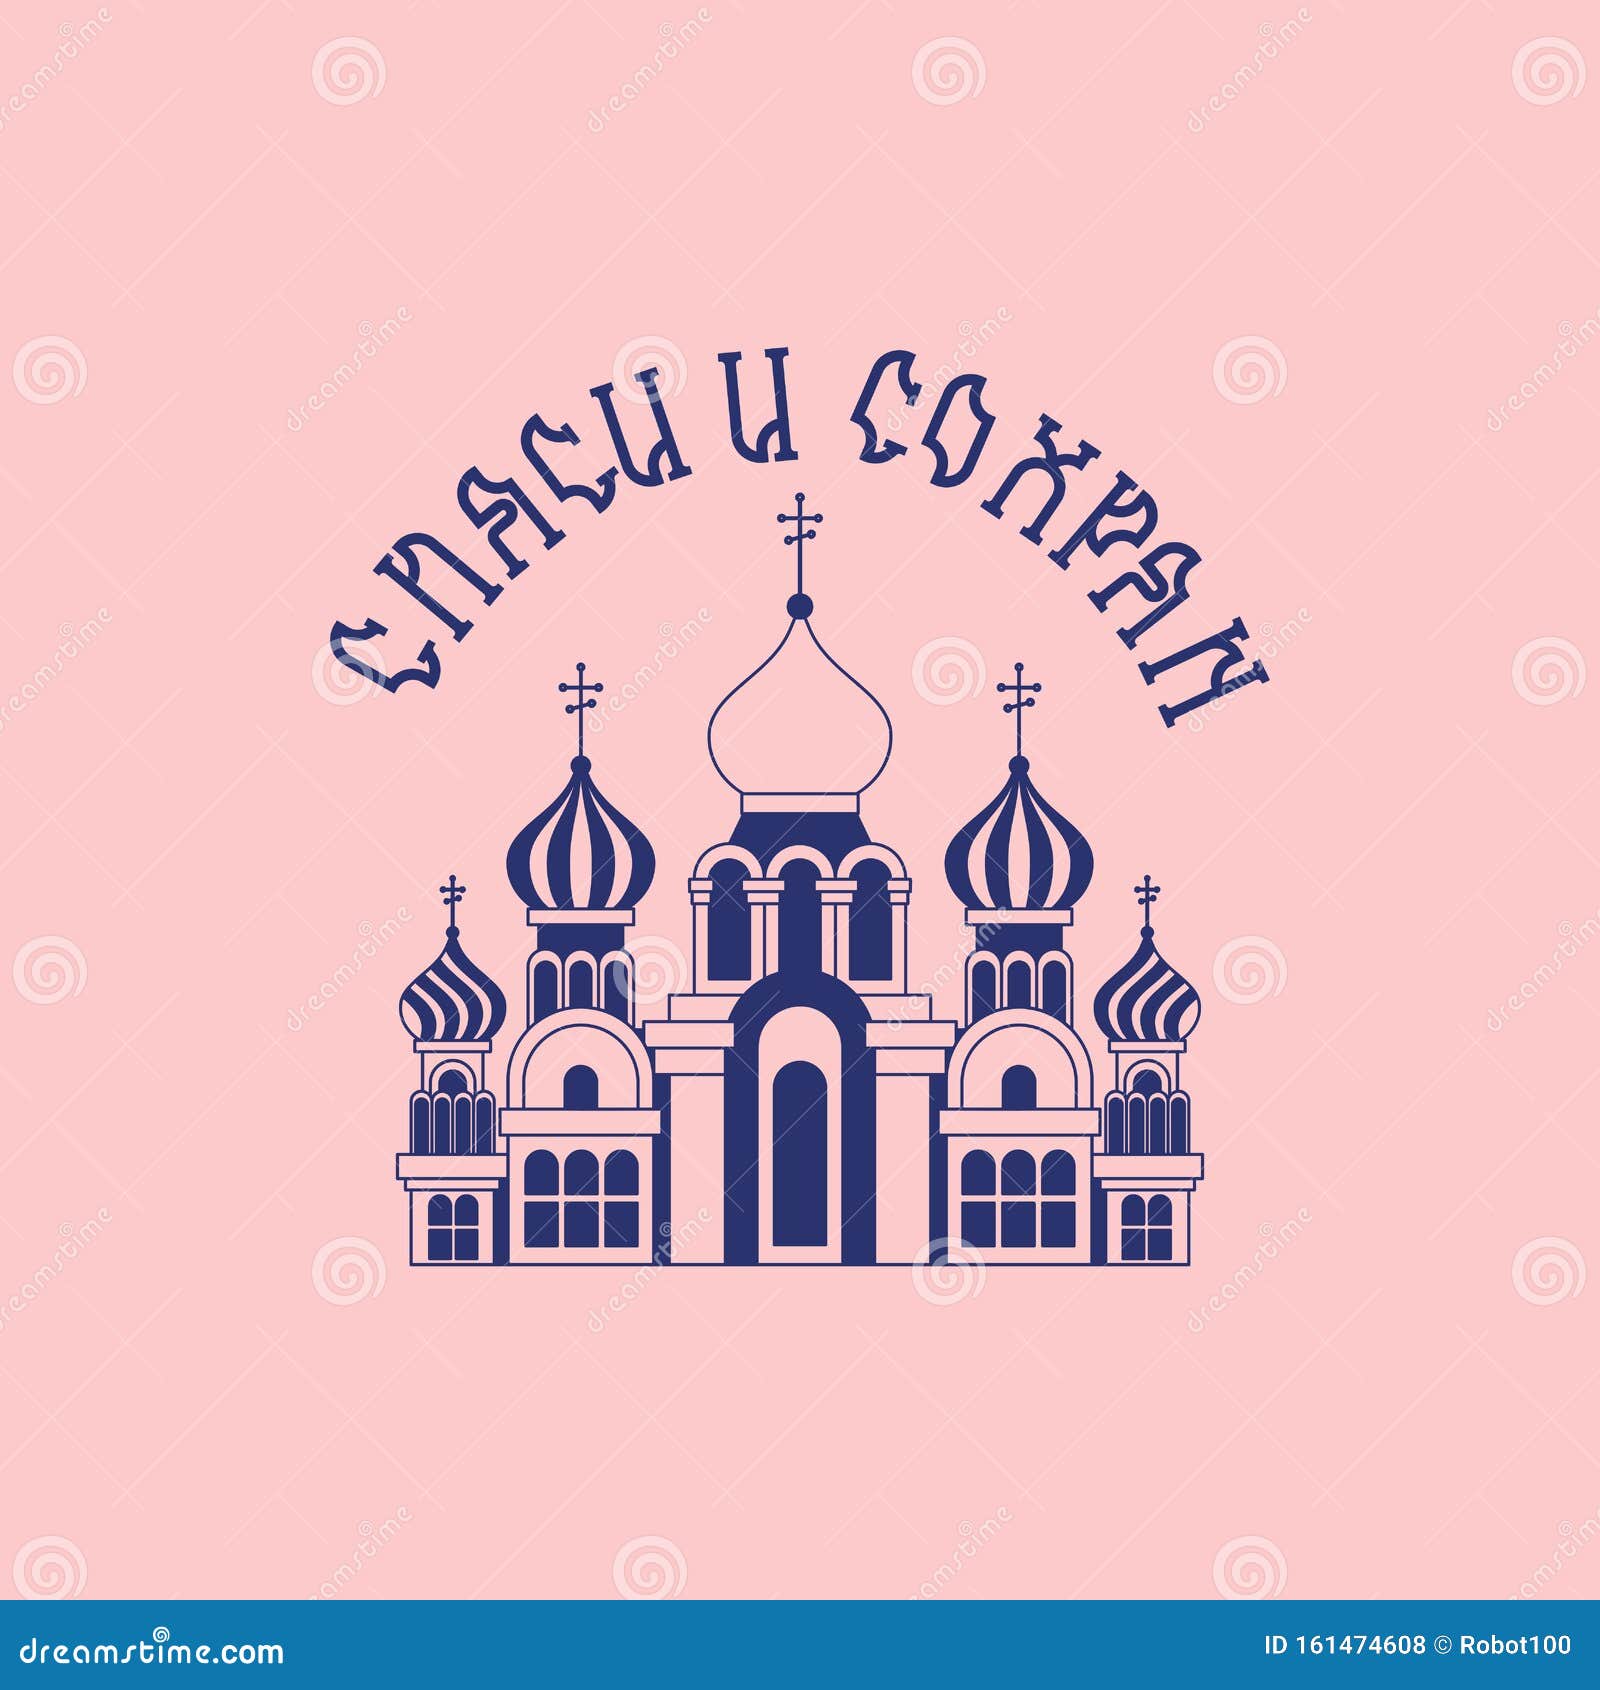 bless and save -translation russian text. russian church and domes. national folk tattoo sign